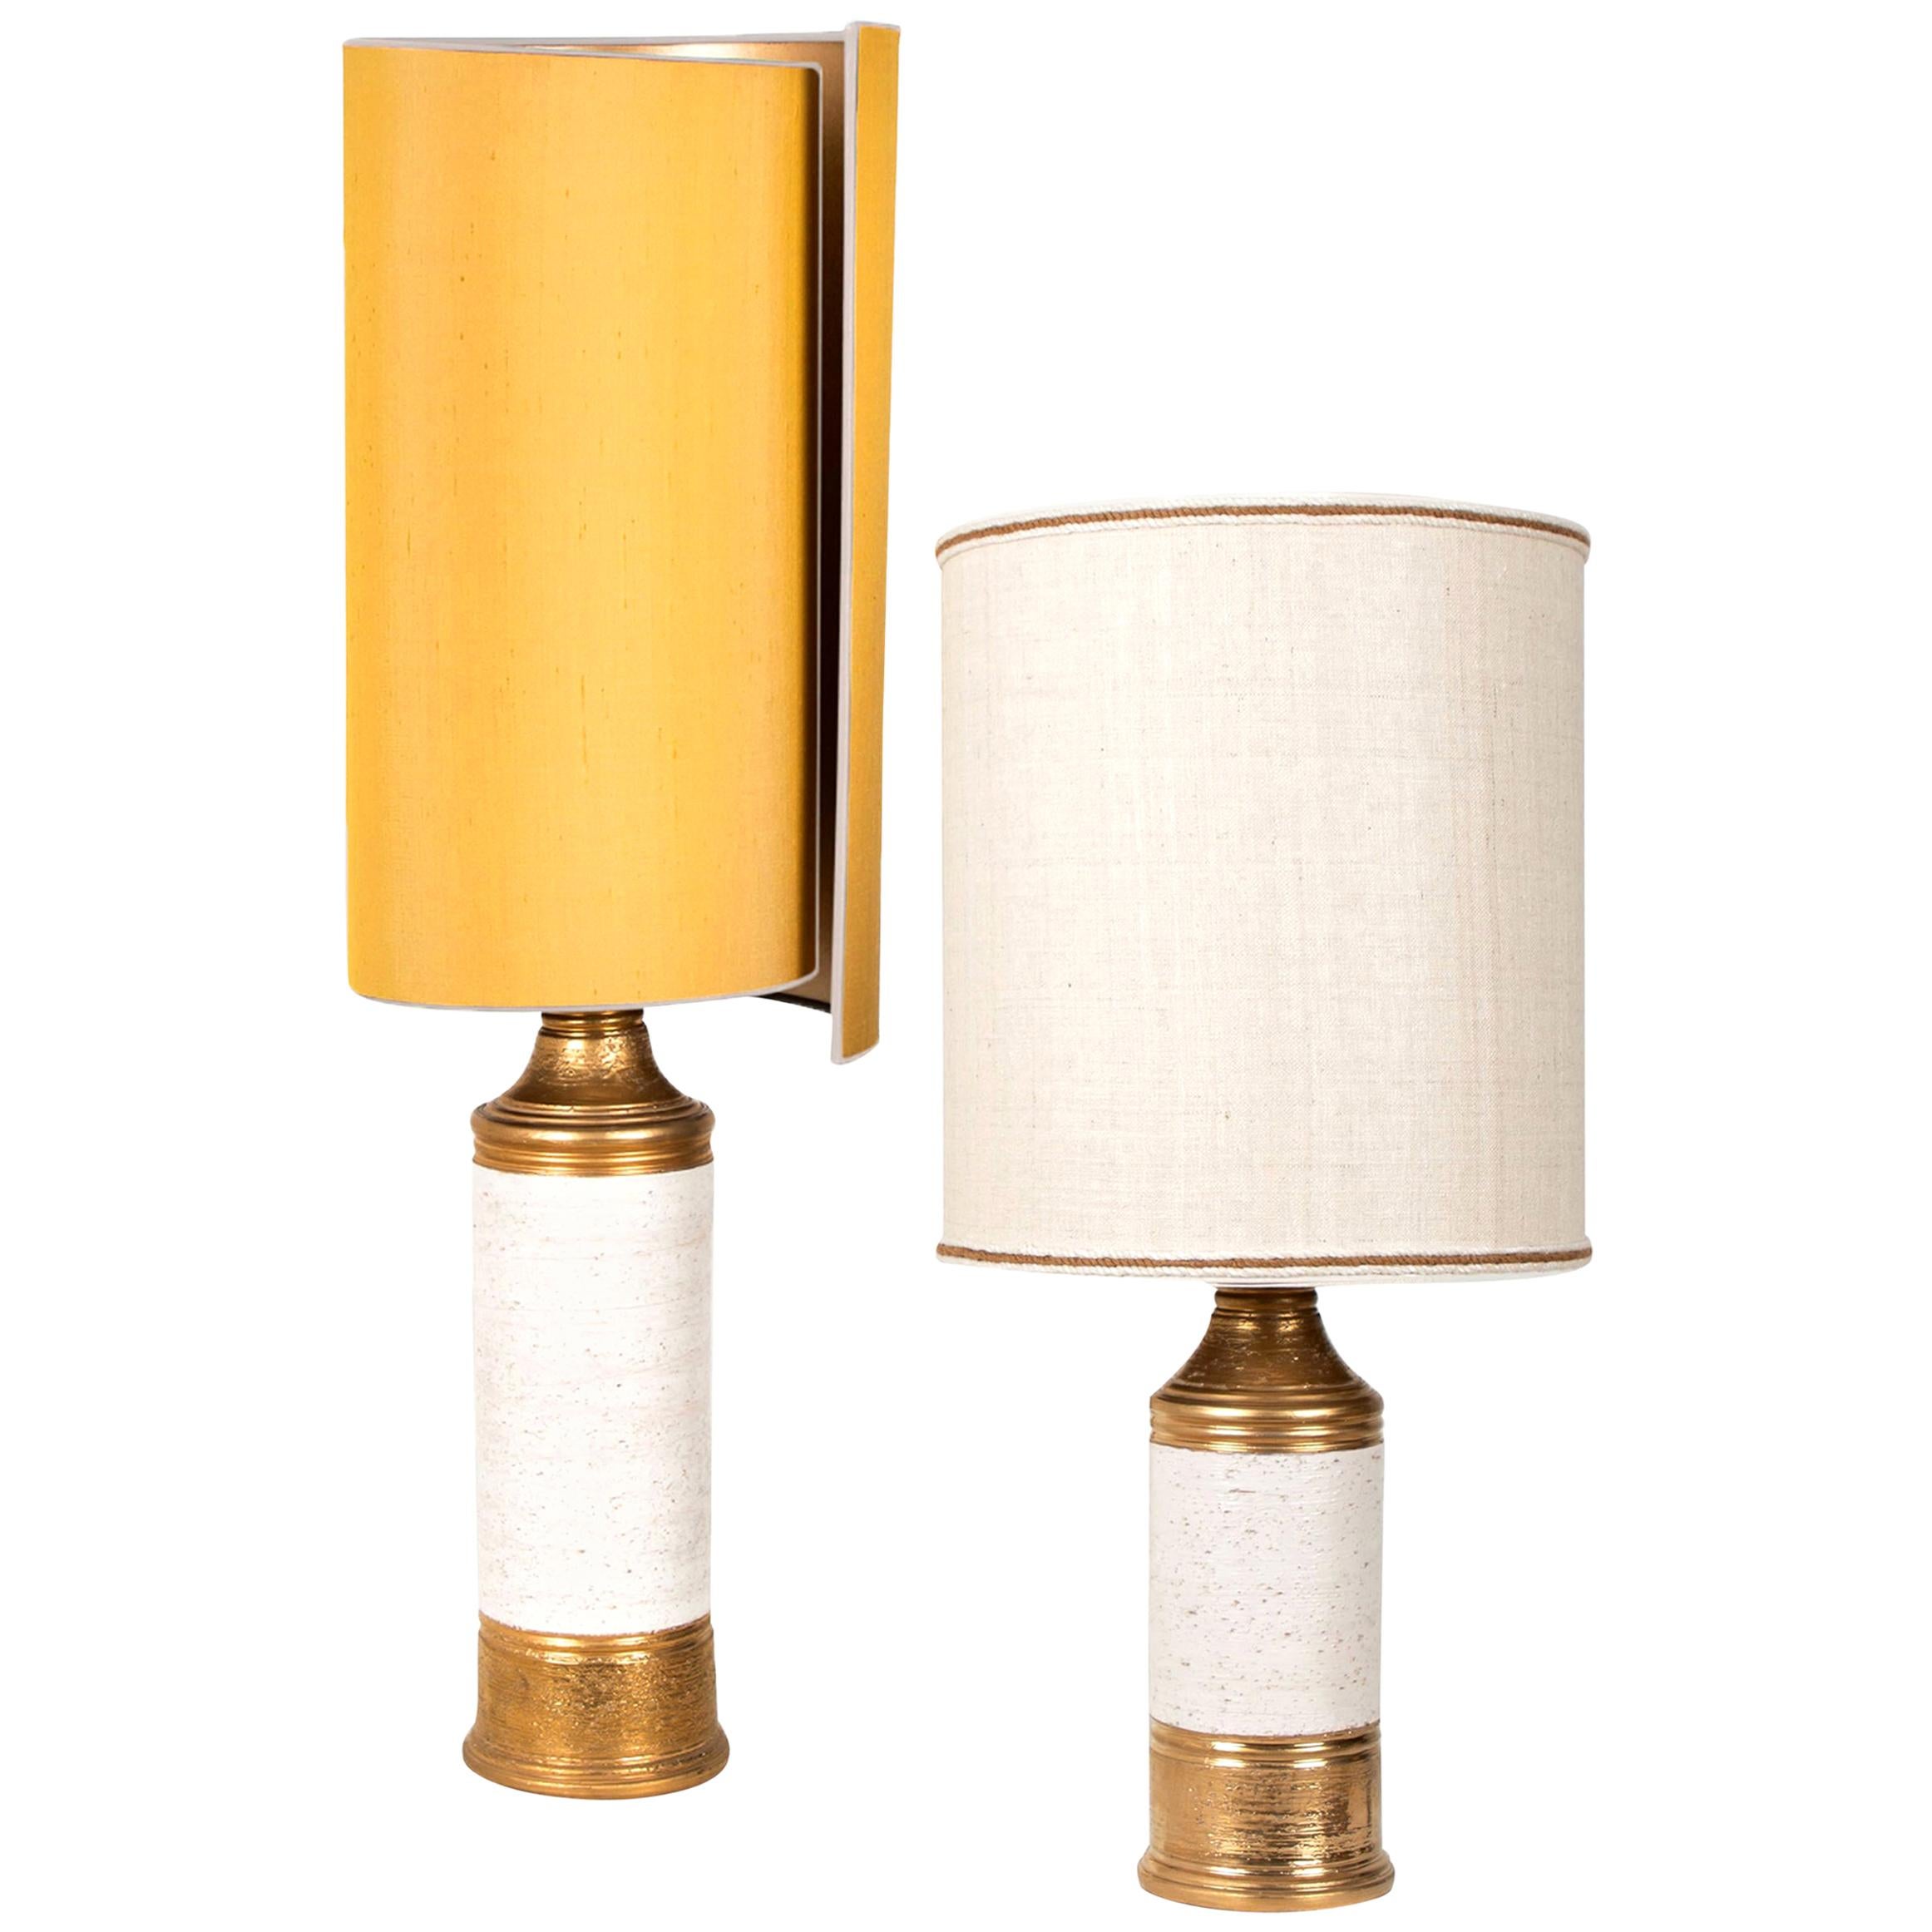 Pair of Bitossi "Birch"Lamps, with Custom Made Silk Shades by Rene Houben